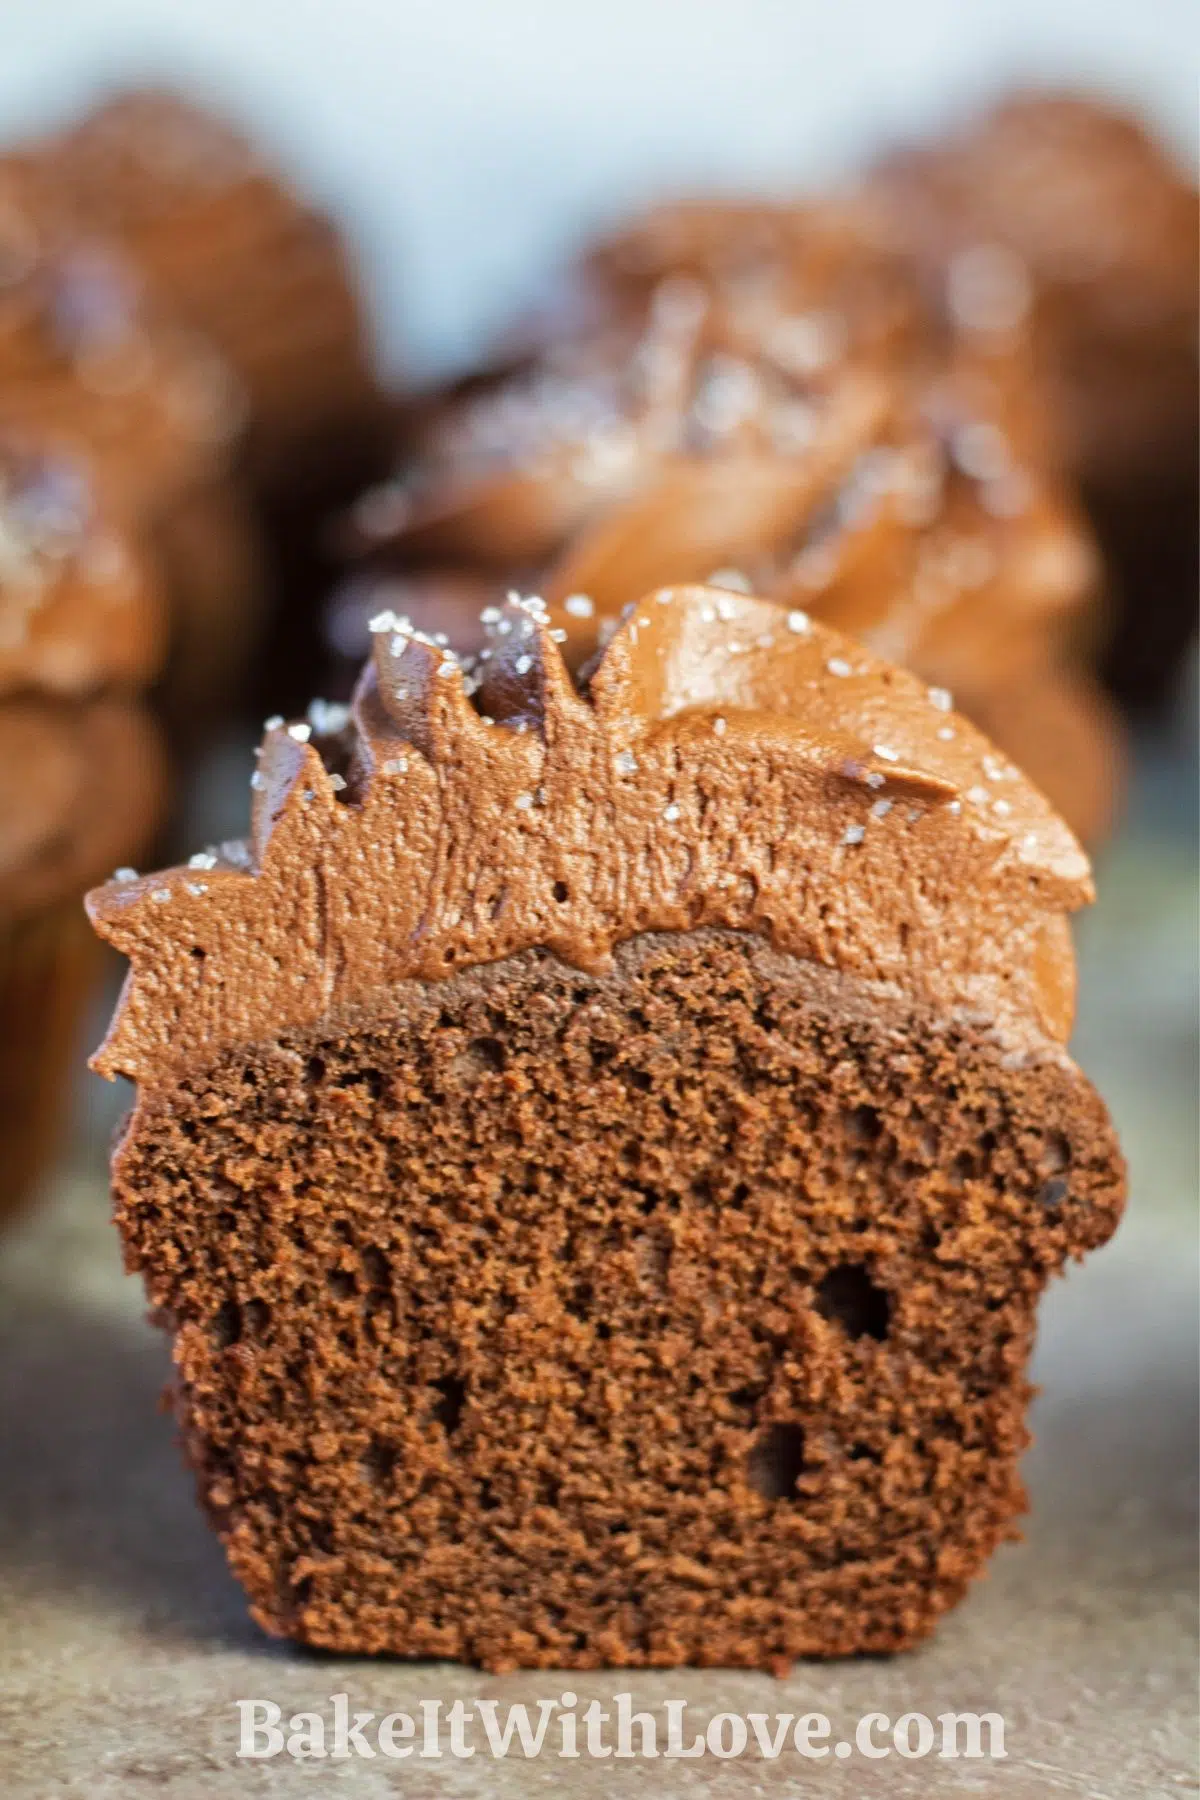 Tall closeup image of the baked Mary Berry chocolate cupcakes sliced in half showing cake texture.